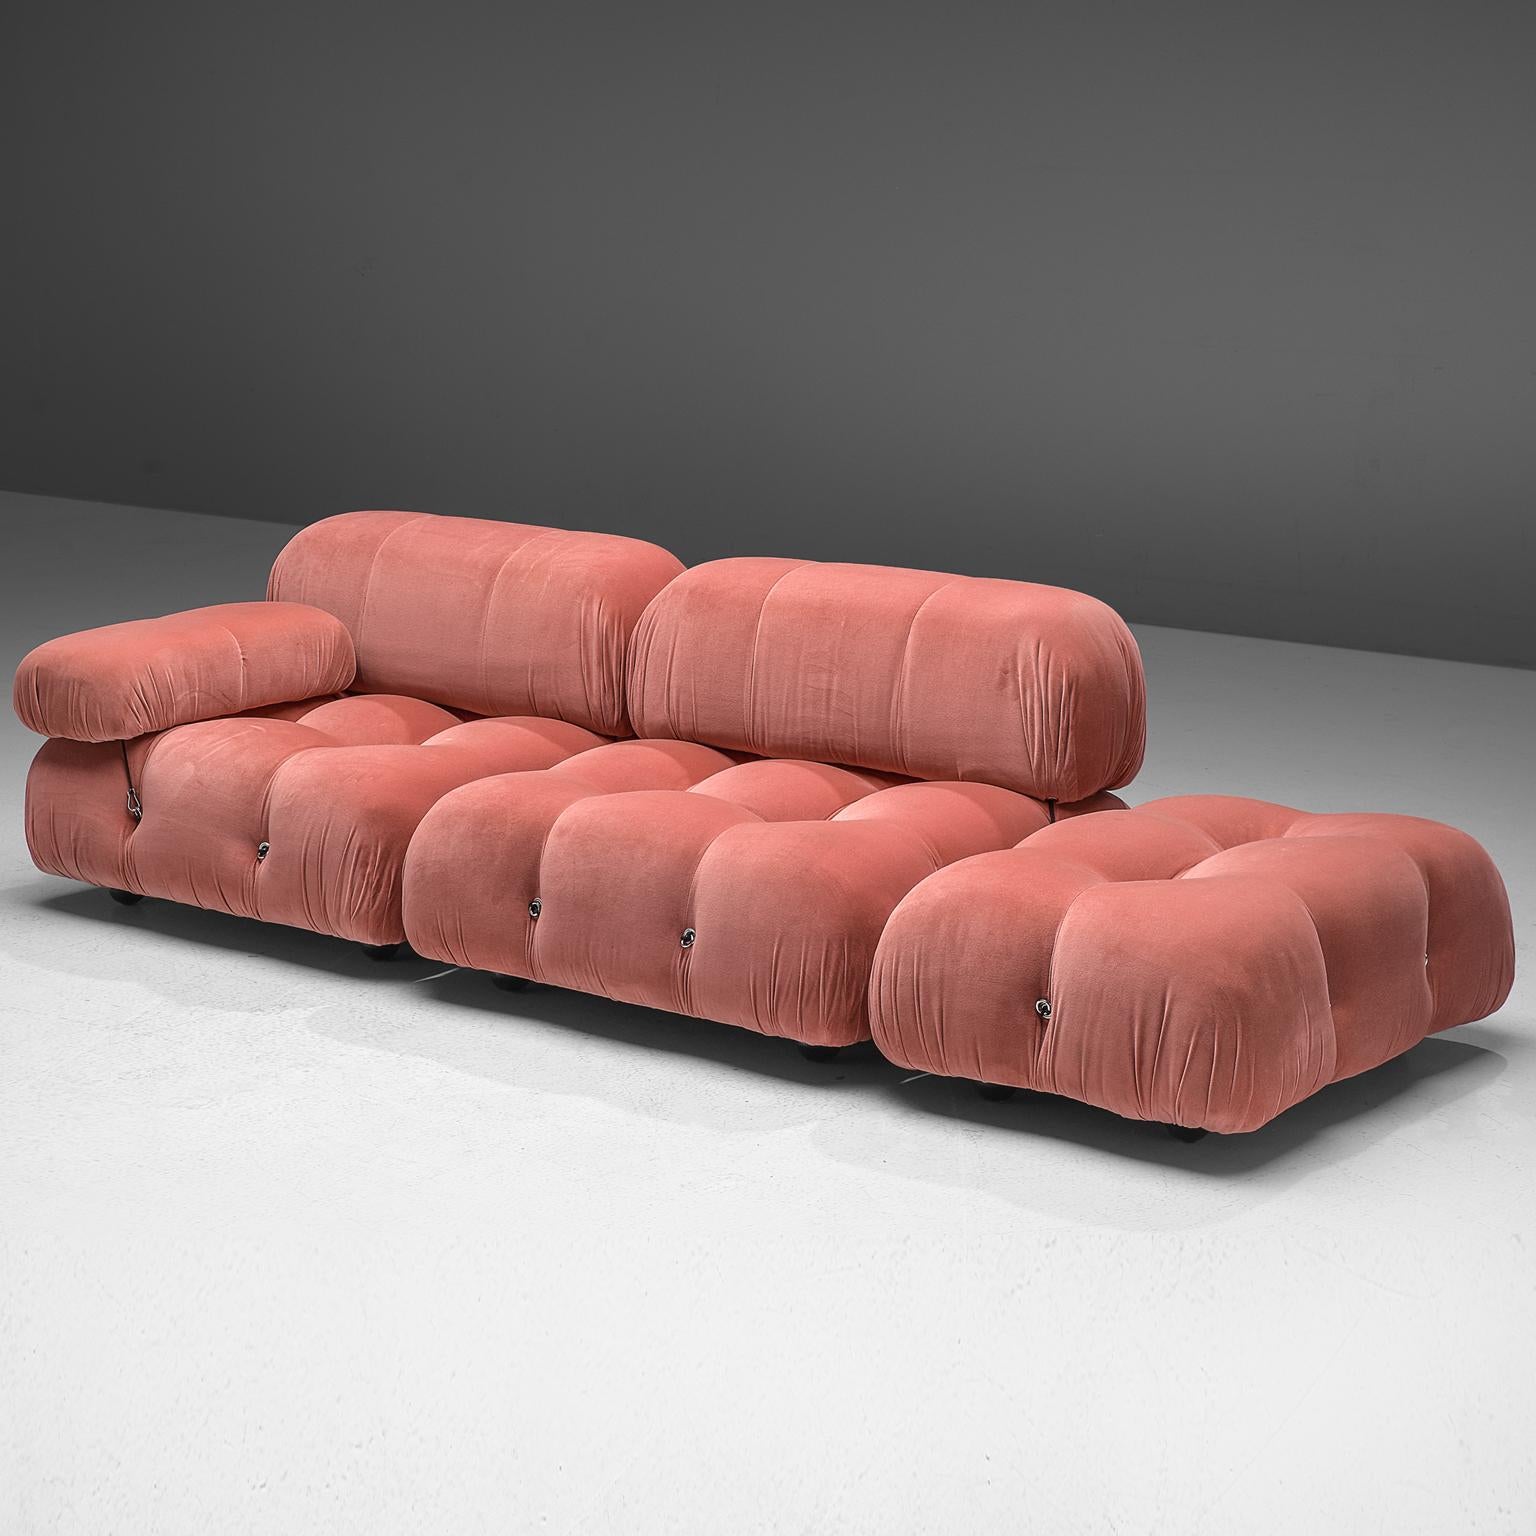 Mario Bellini, modular 'Cameleonda' sofa in pink fabric, Italy, 1972.

The sectional elements of this sofa can be used freely and apart from one another. The upholstery on this piece features newly upholstered pink velvet. The backs are provided